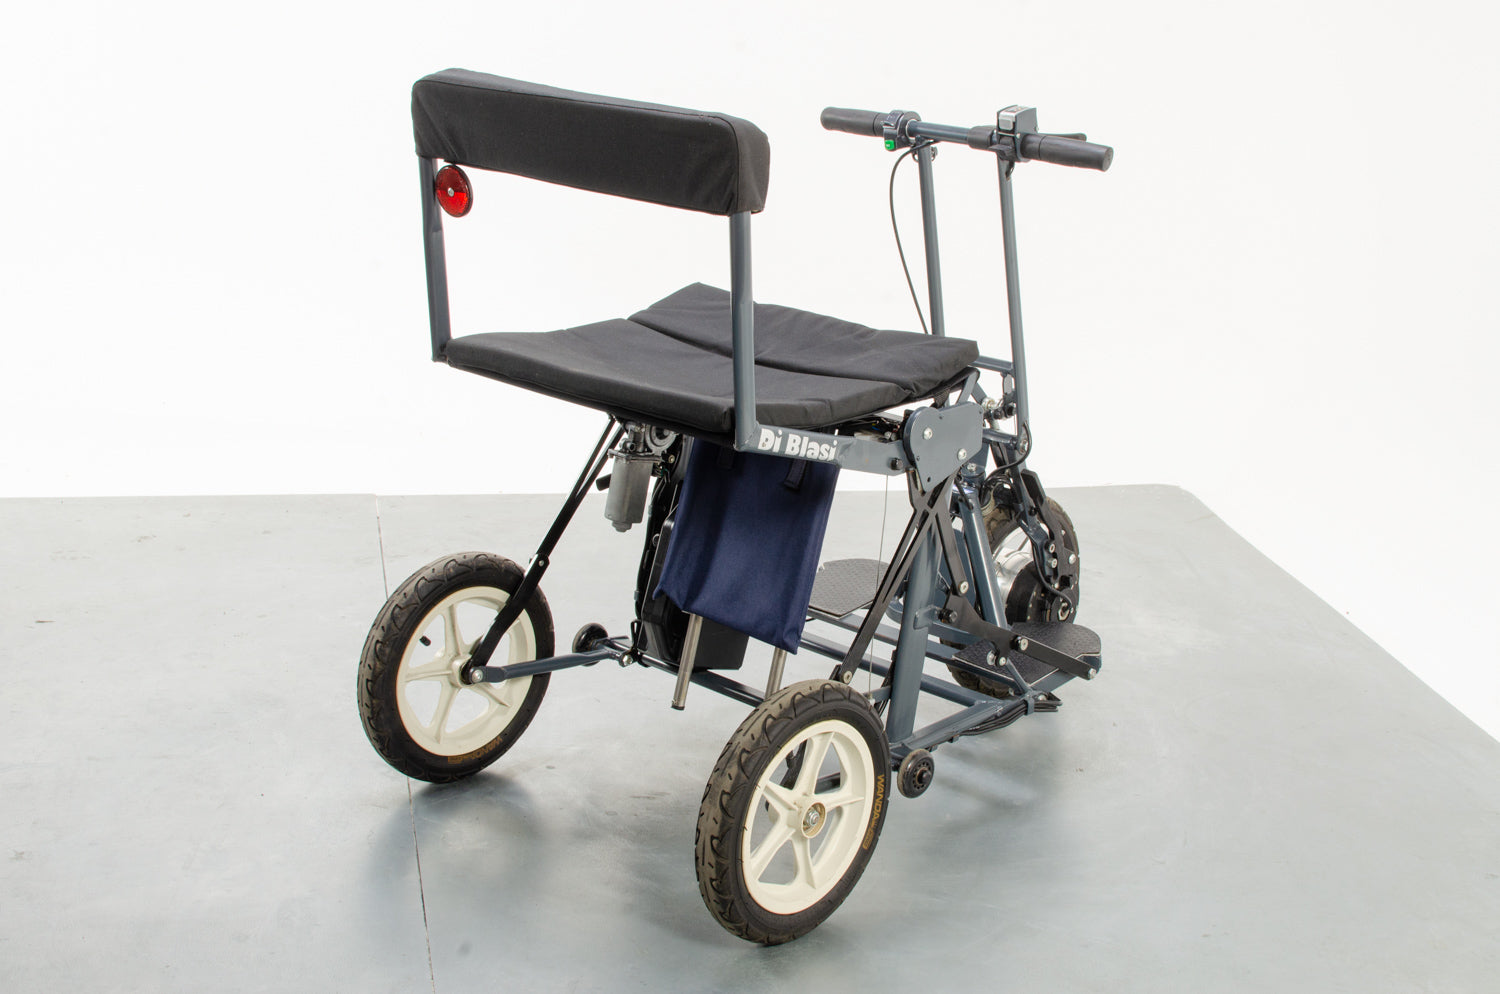 2014 DiBlasi R30 Automatic Folding Lightweight Mobility Scooter with Lithium Battery